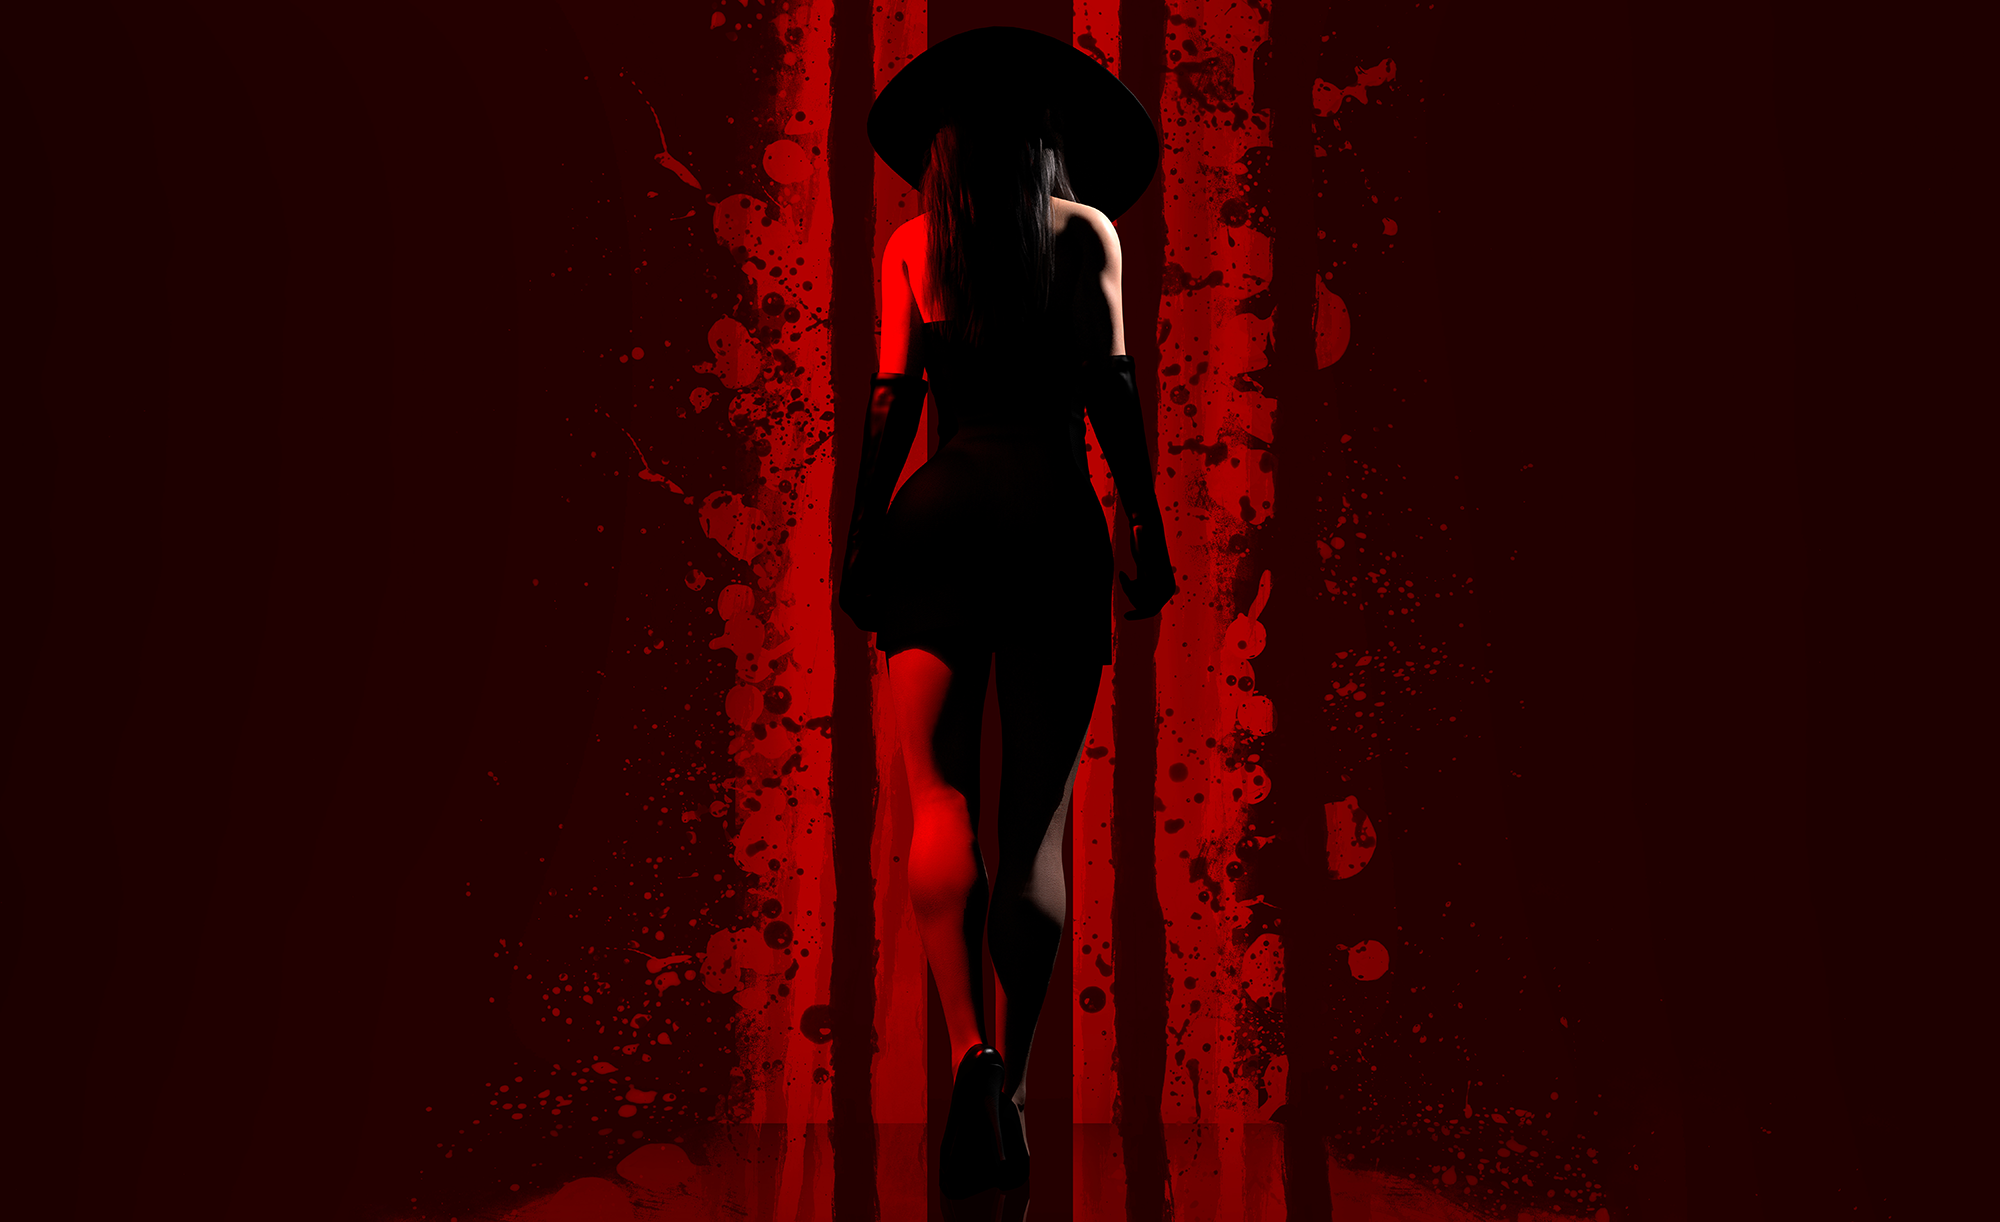 A female vampire spy walks away from the viewer; the image drenched in the red of blood.